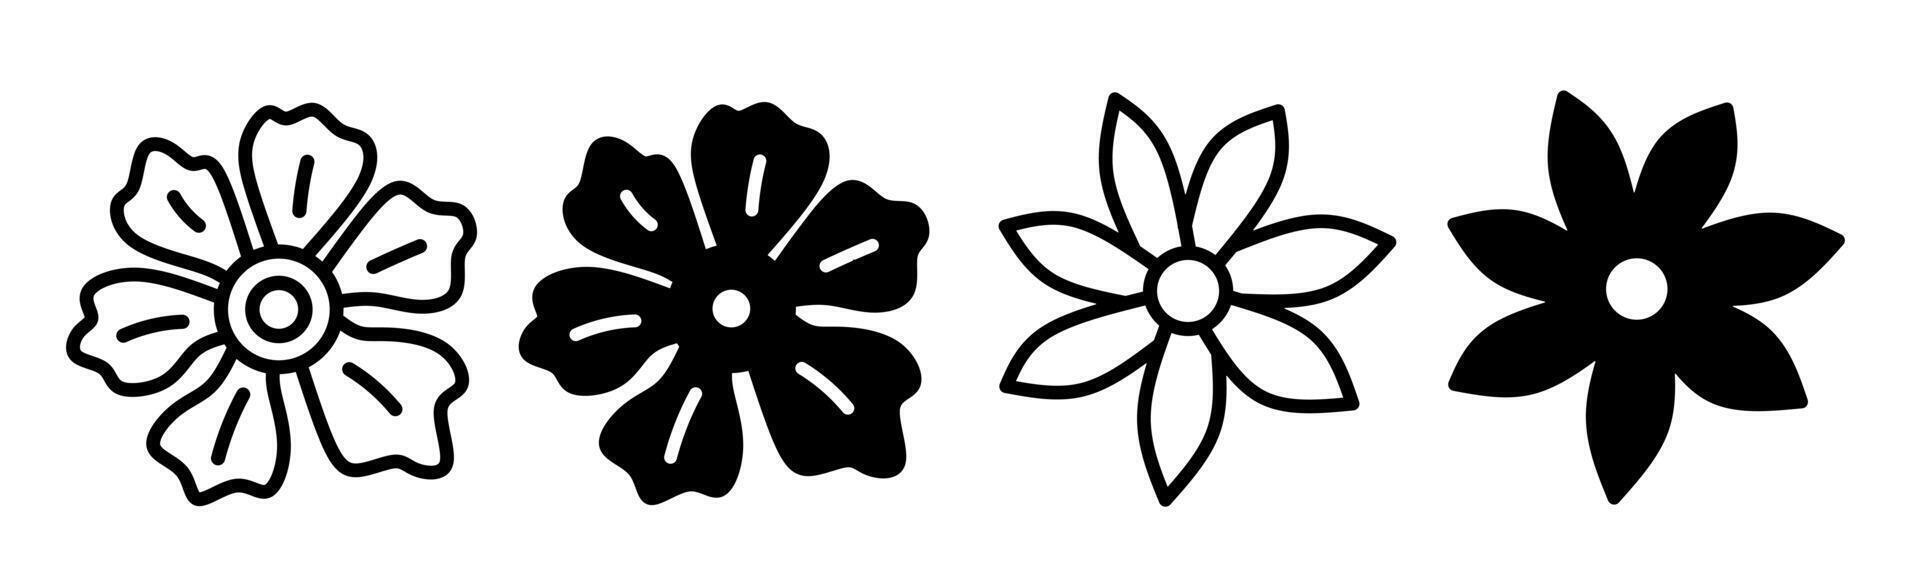 Silhouette of flower icon illustration on white background. Flower icon set for business. Stock vector